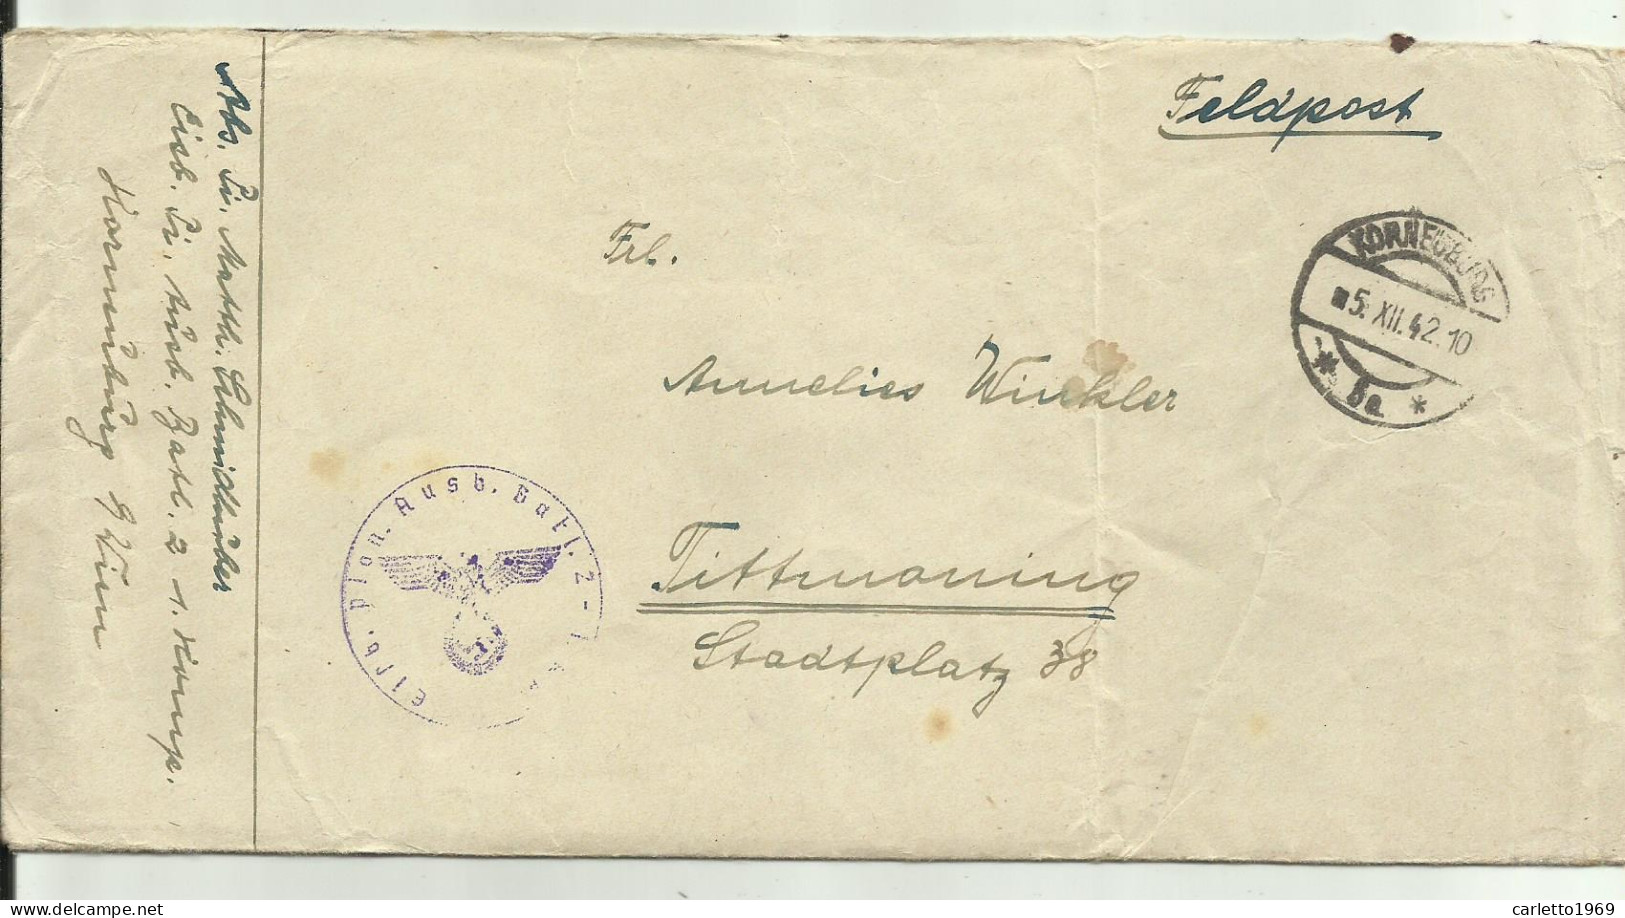 FELDPOST 1942 CON LETTERA   - Used Stamps